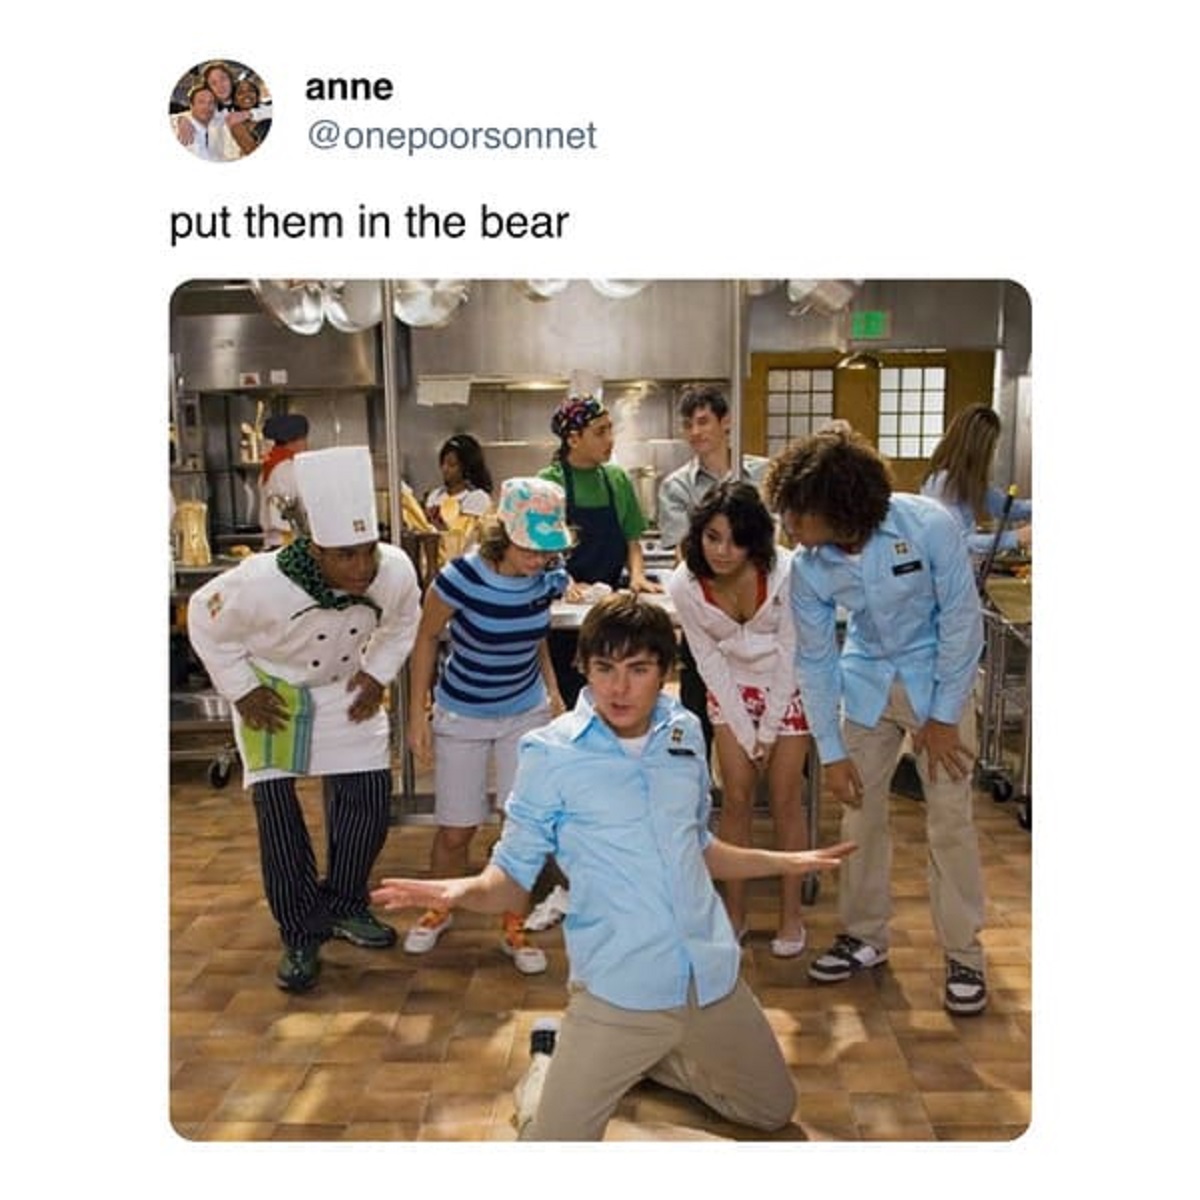 community - anne put them in the bear